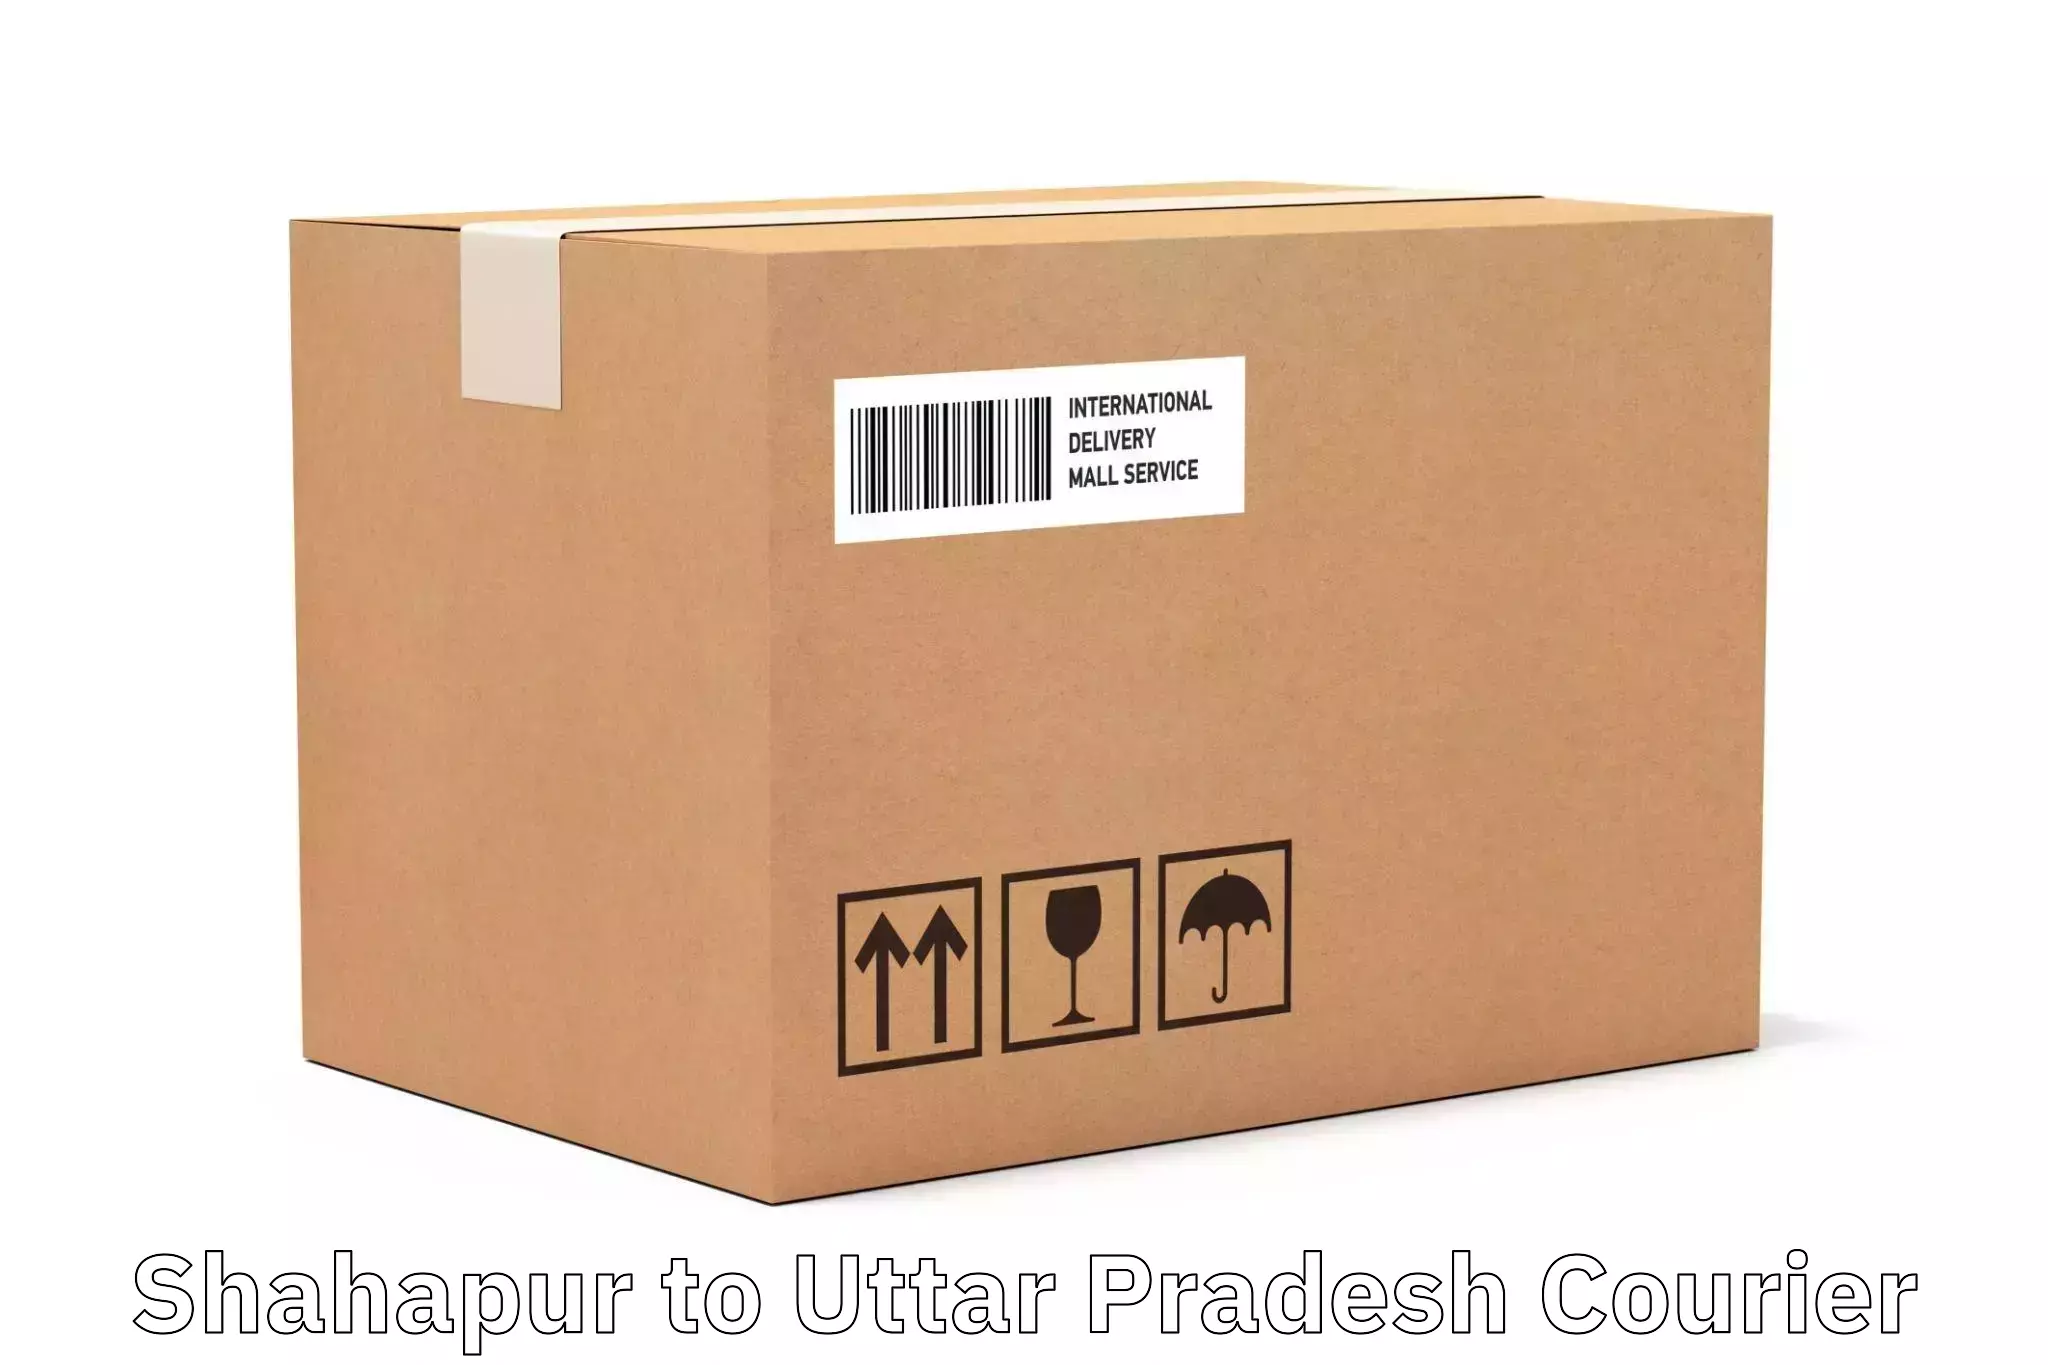 Express delivery capabilities Shahapur to Madhuban